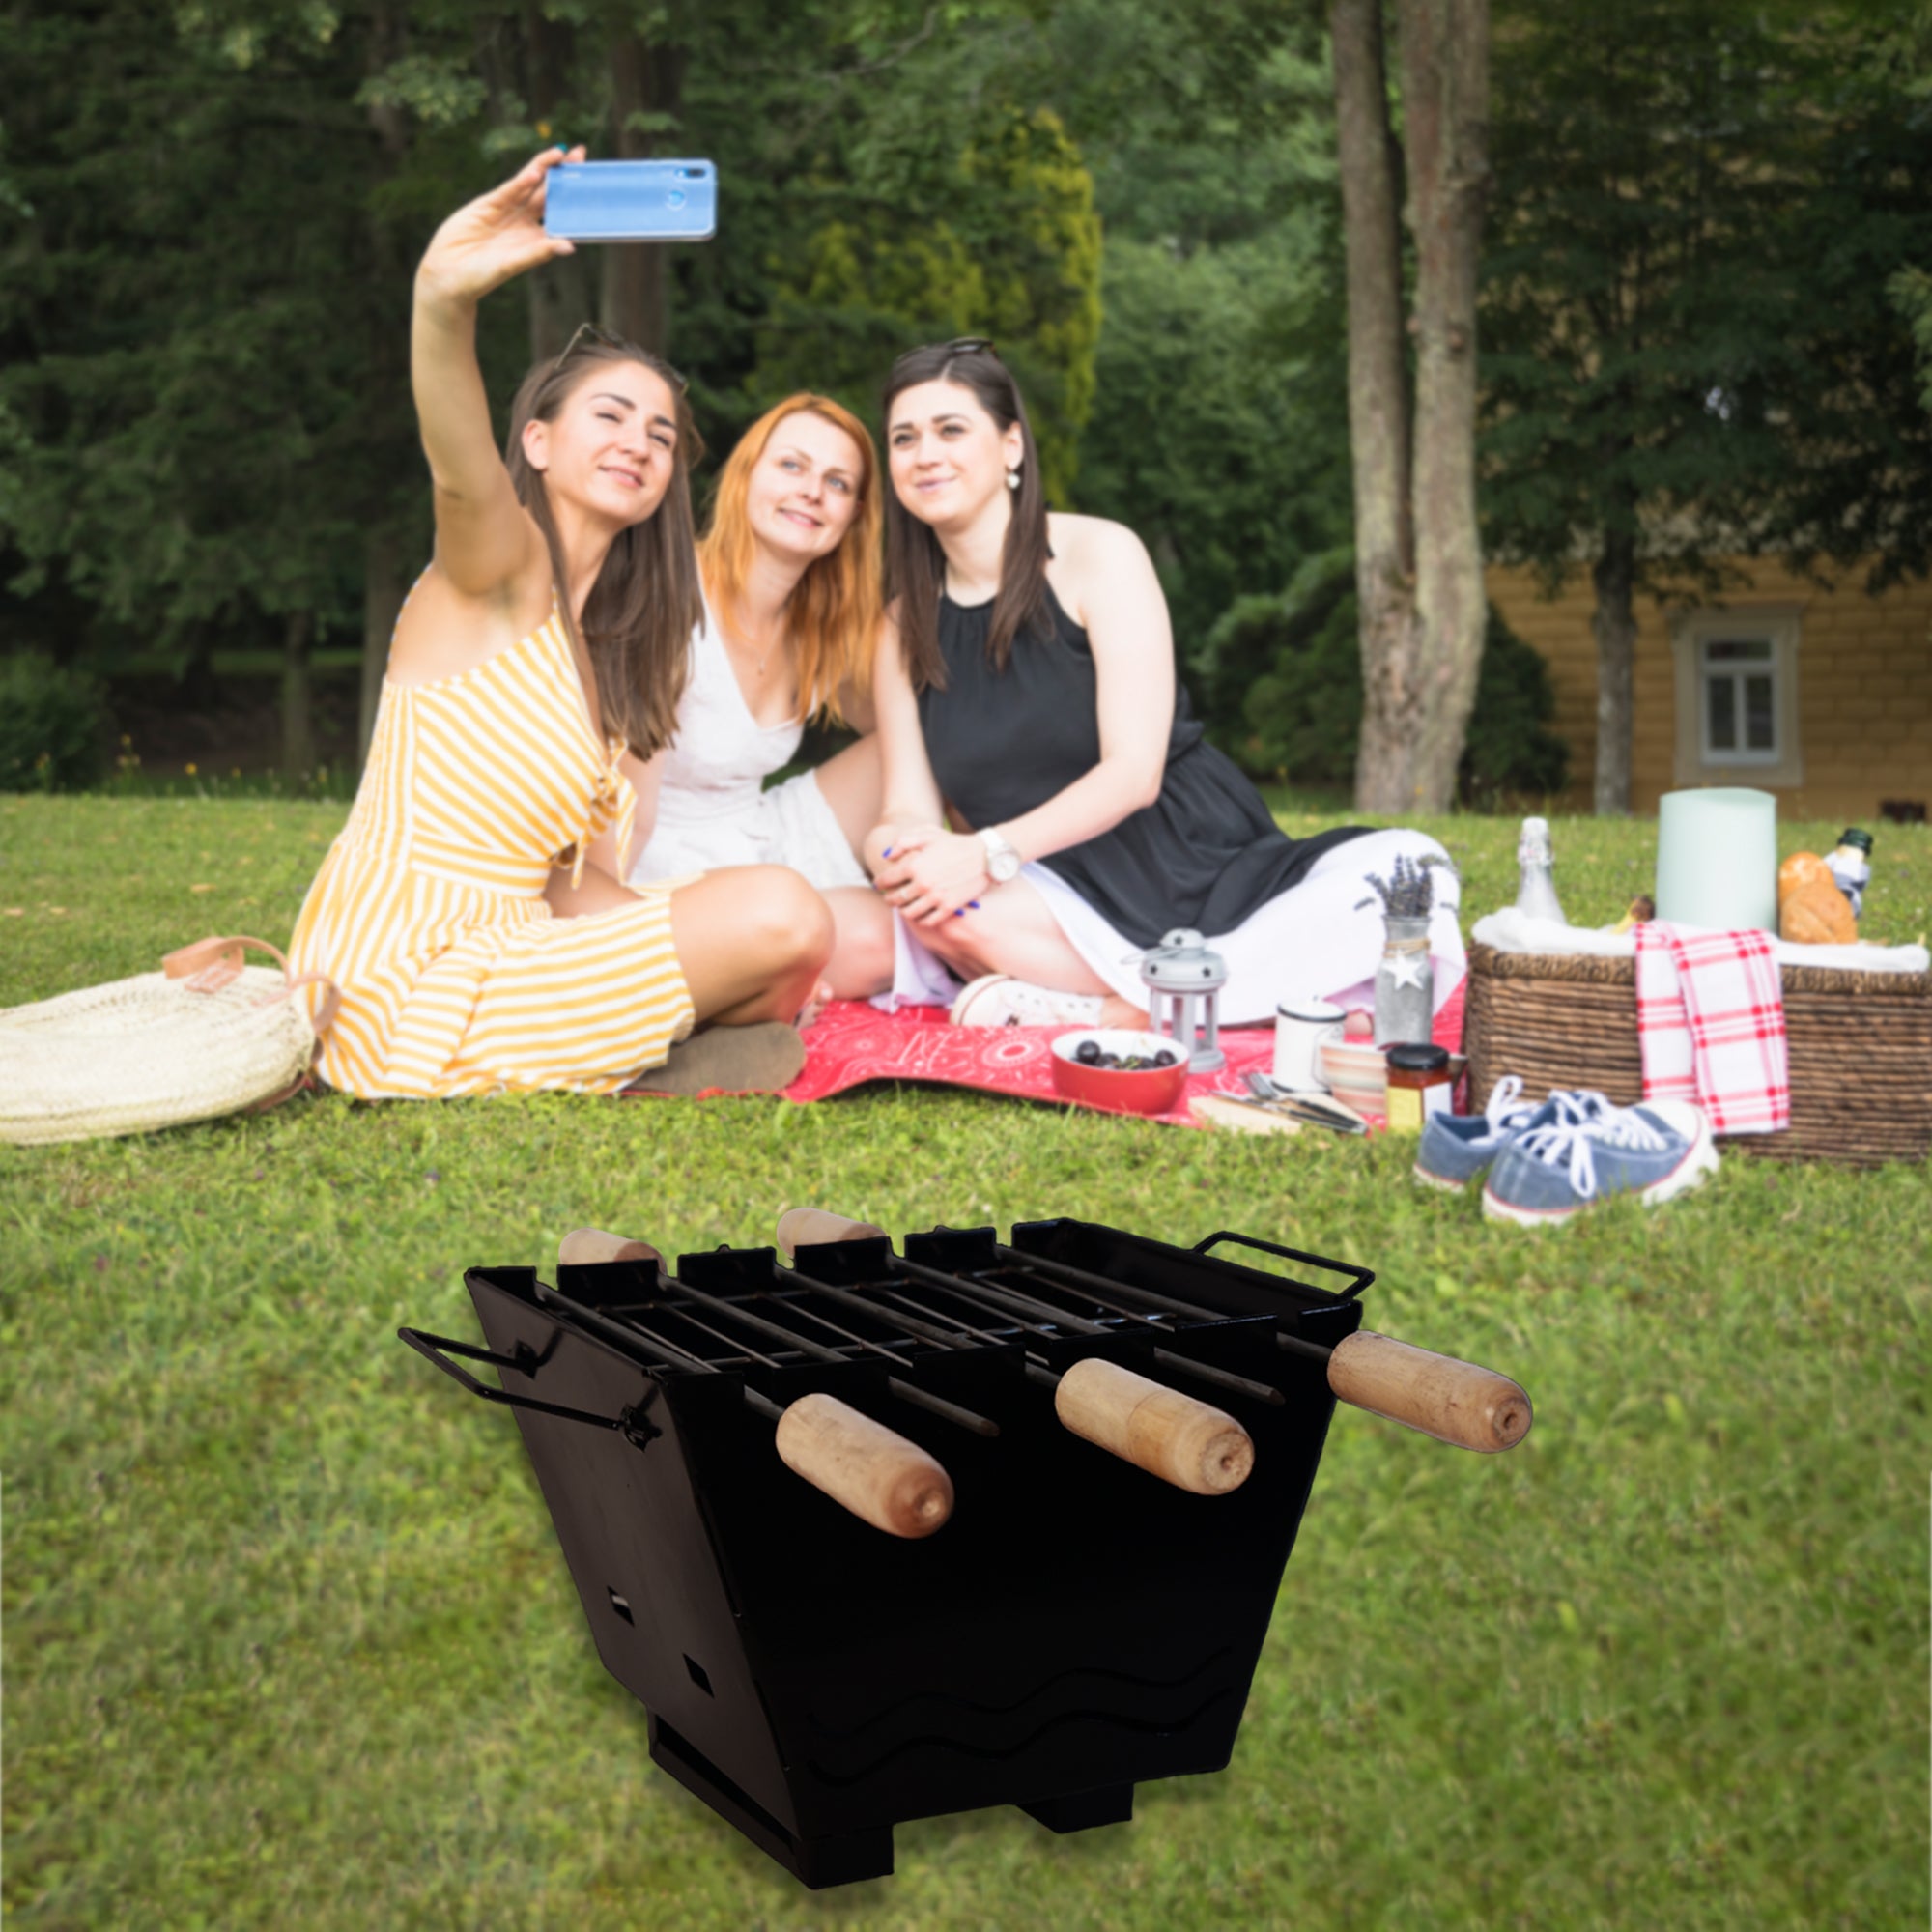 Folding & Portable Outdoor Barbeque Grill Toaster Charcoal BBQ Grill Oven  Tandoor Grill